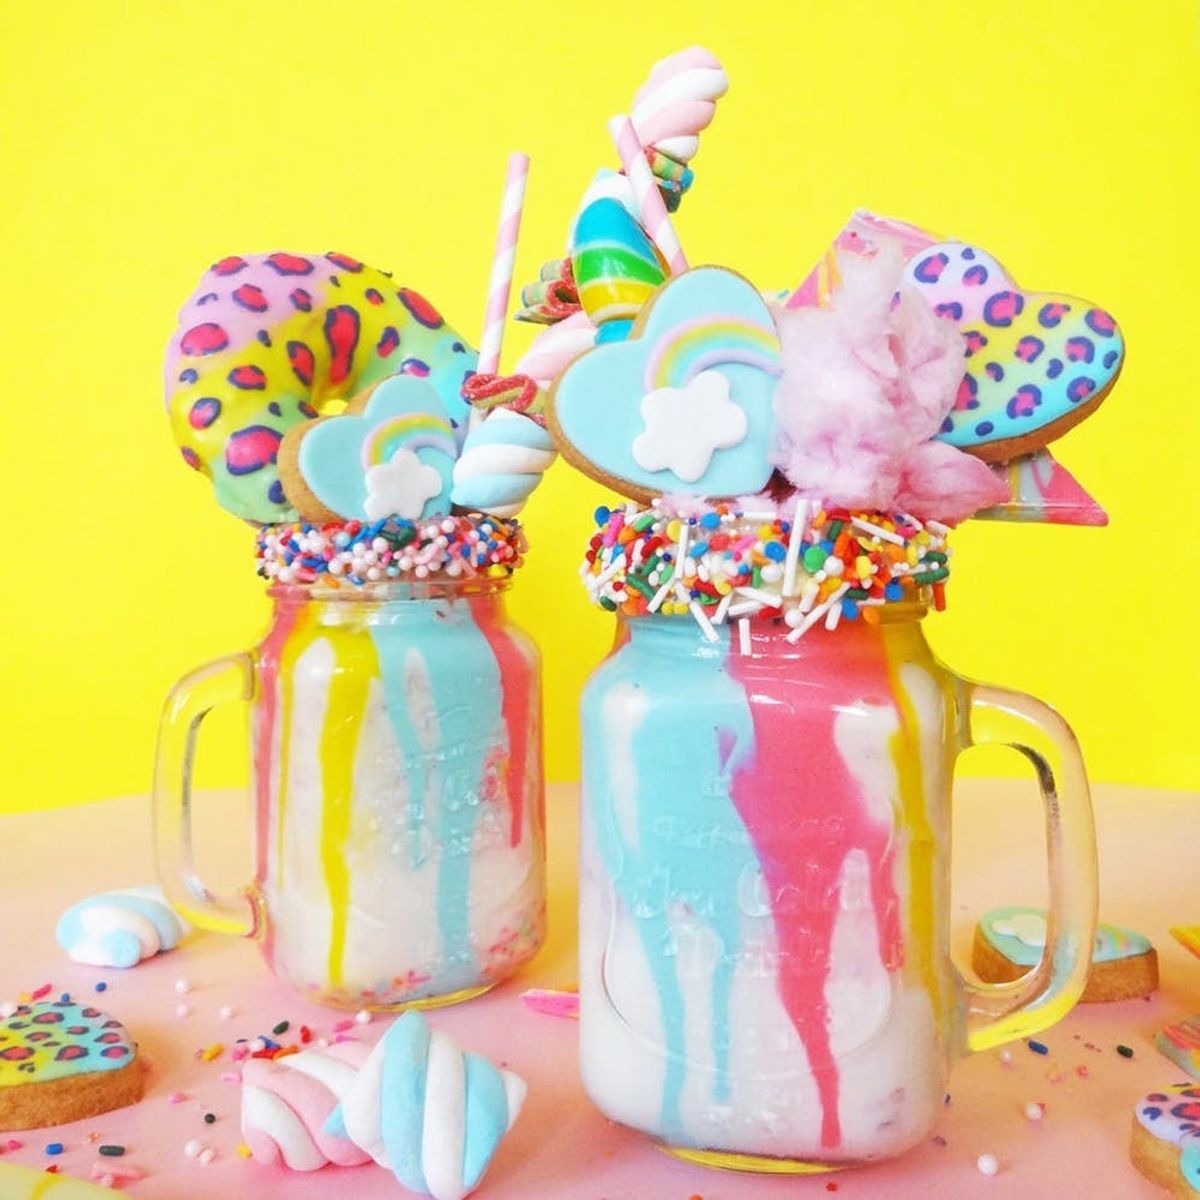 15 Absurdly Cute (and Decadent) Desserts for Every Occasion